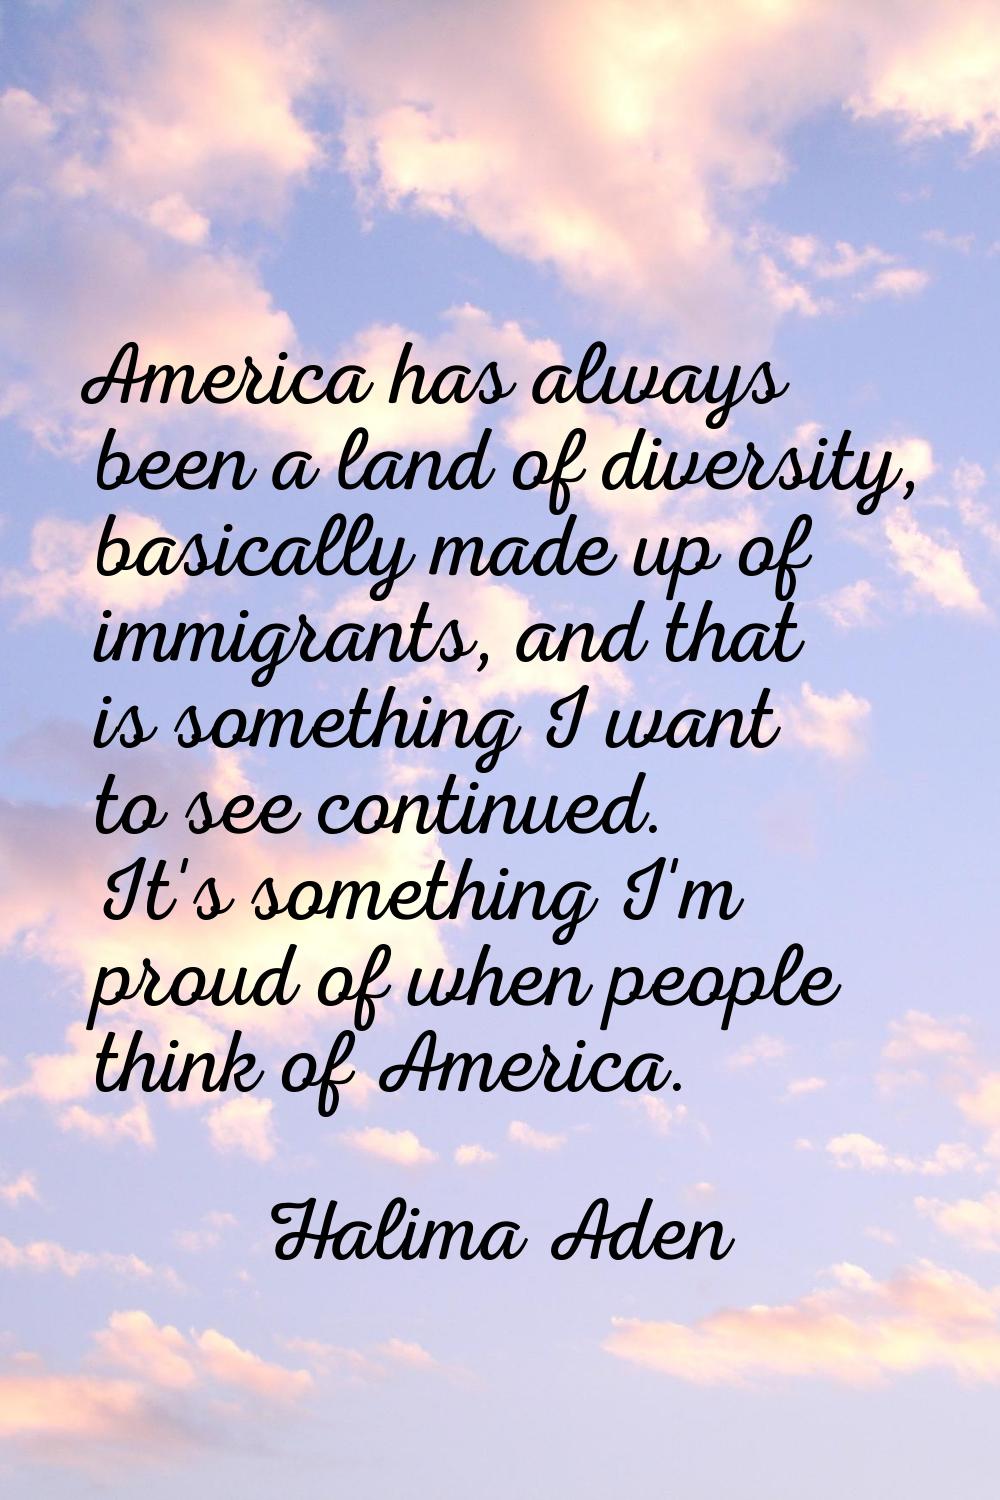 America has always been a land of diversity, basically made up of immigrants, and that is something